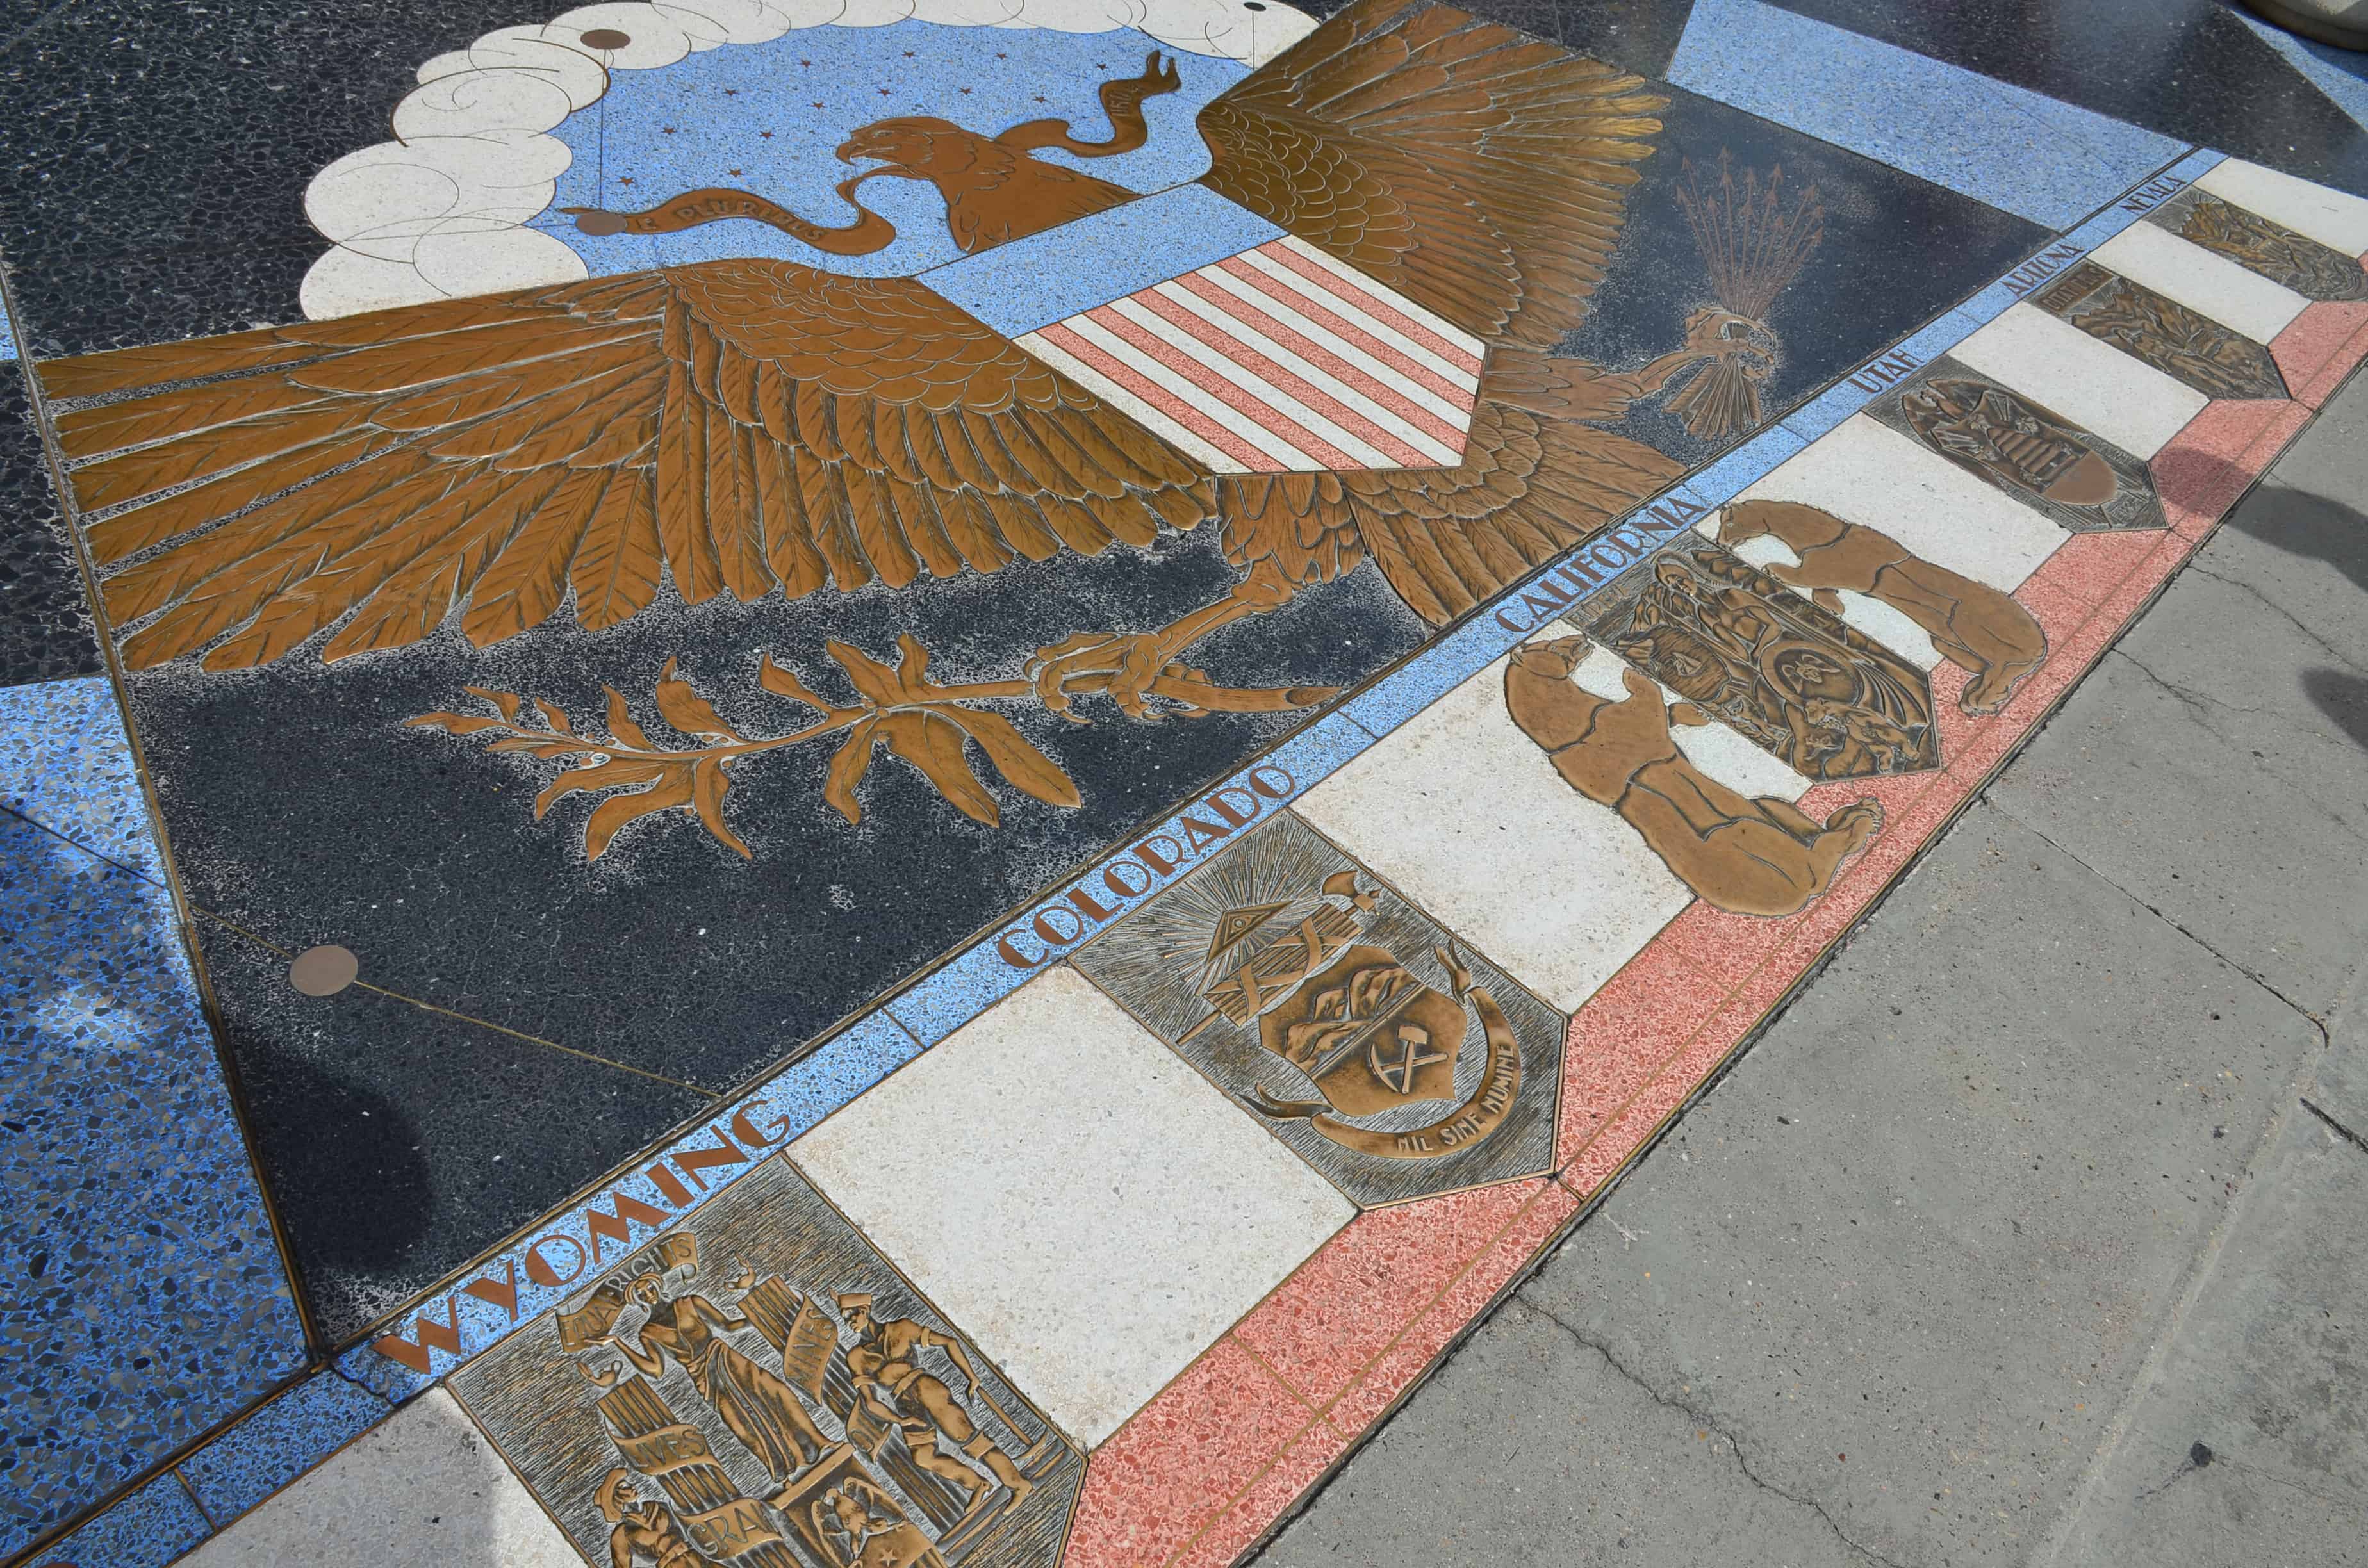 State seals at Hoover Dam in Nevada